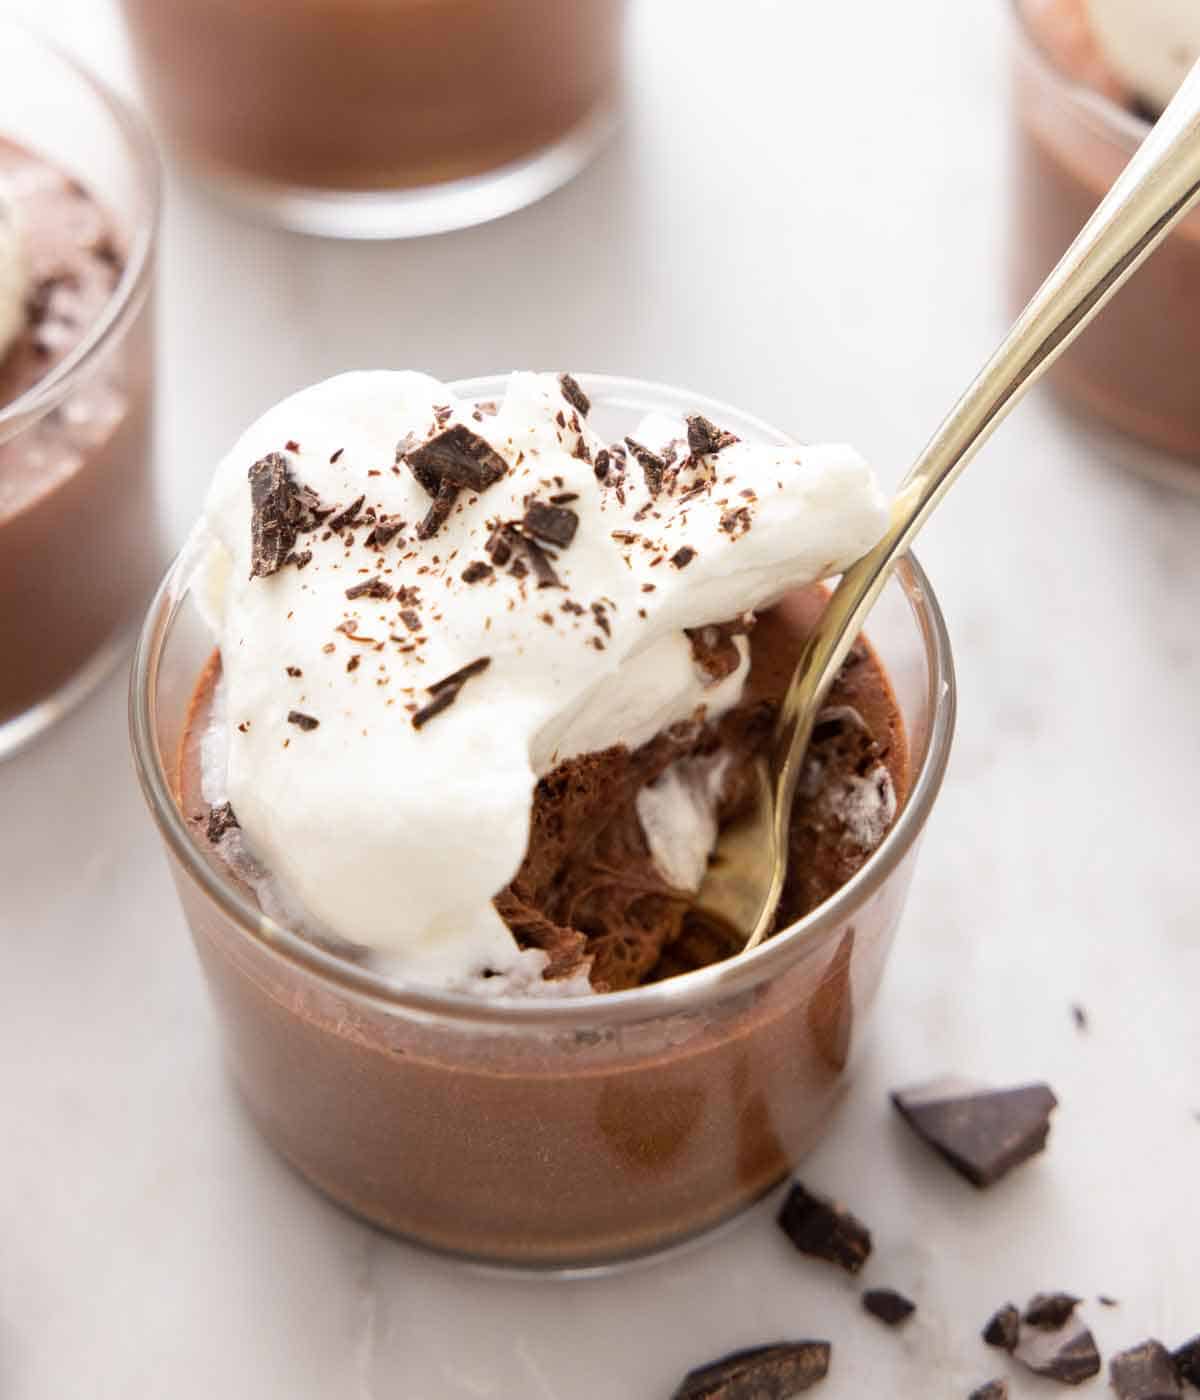 A spoon inside of a glass of chocolate mousse with whipped cream and chocolate. Small pieces of chocolate is scattered by the glass.